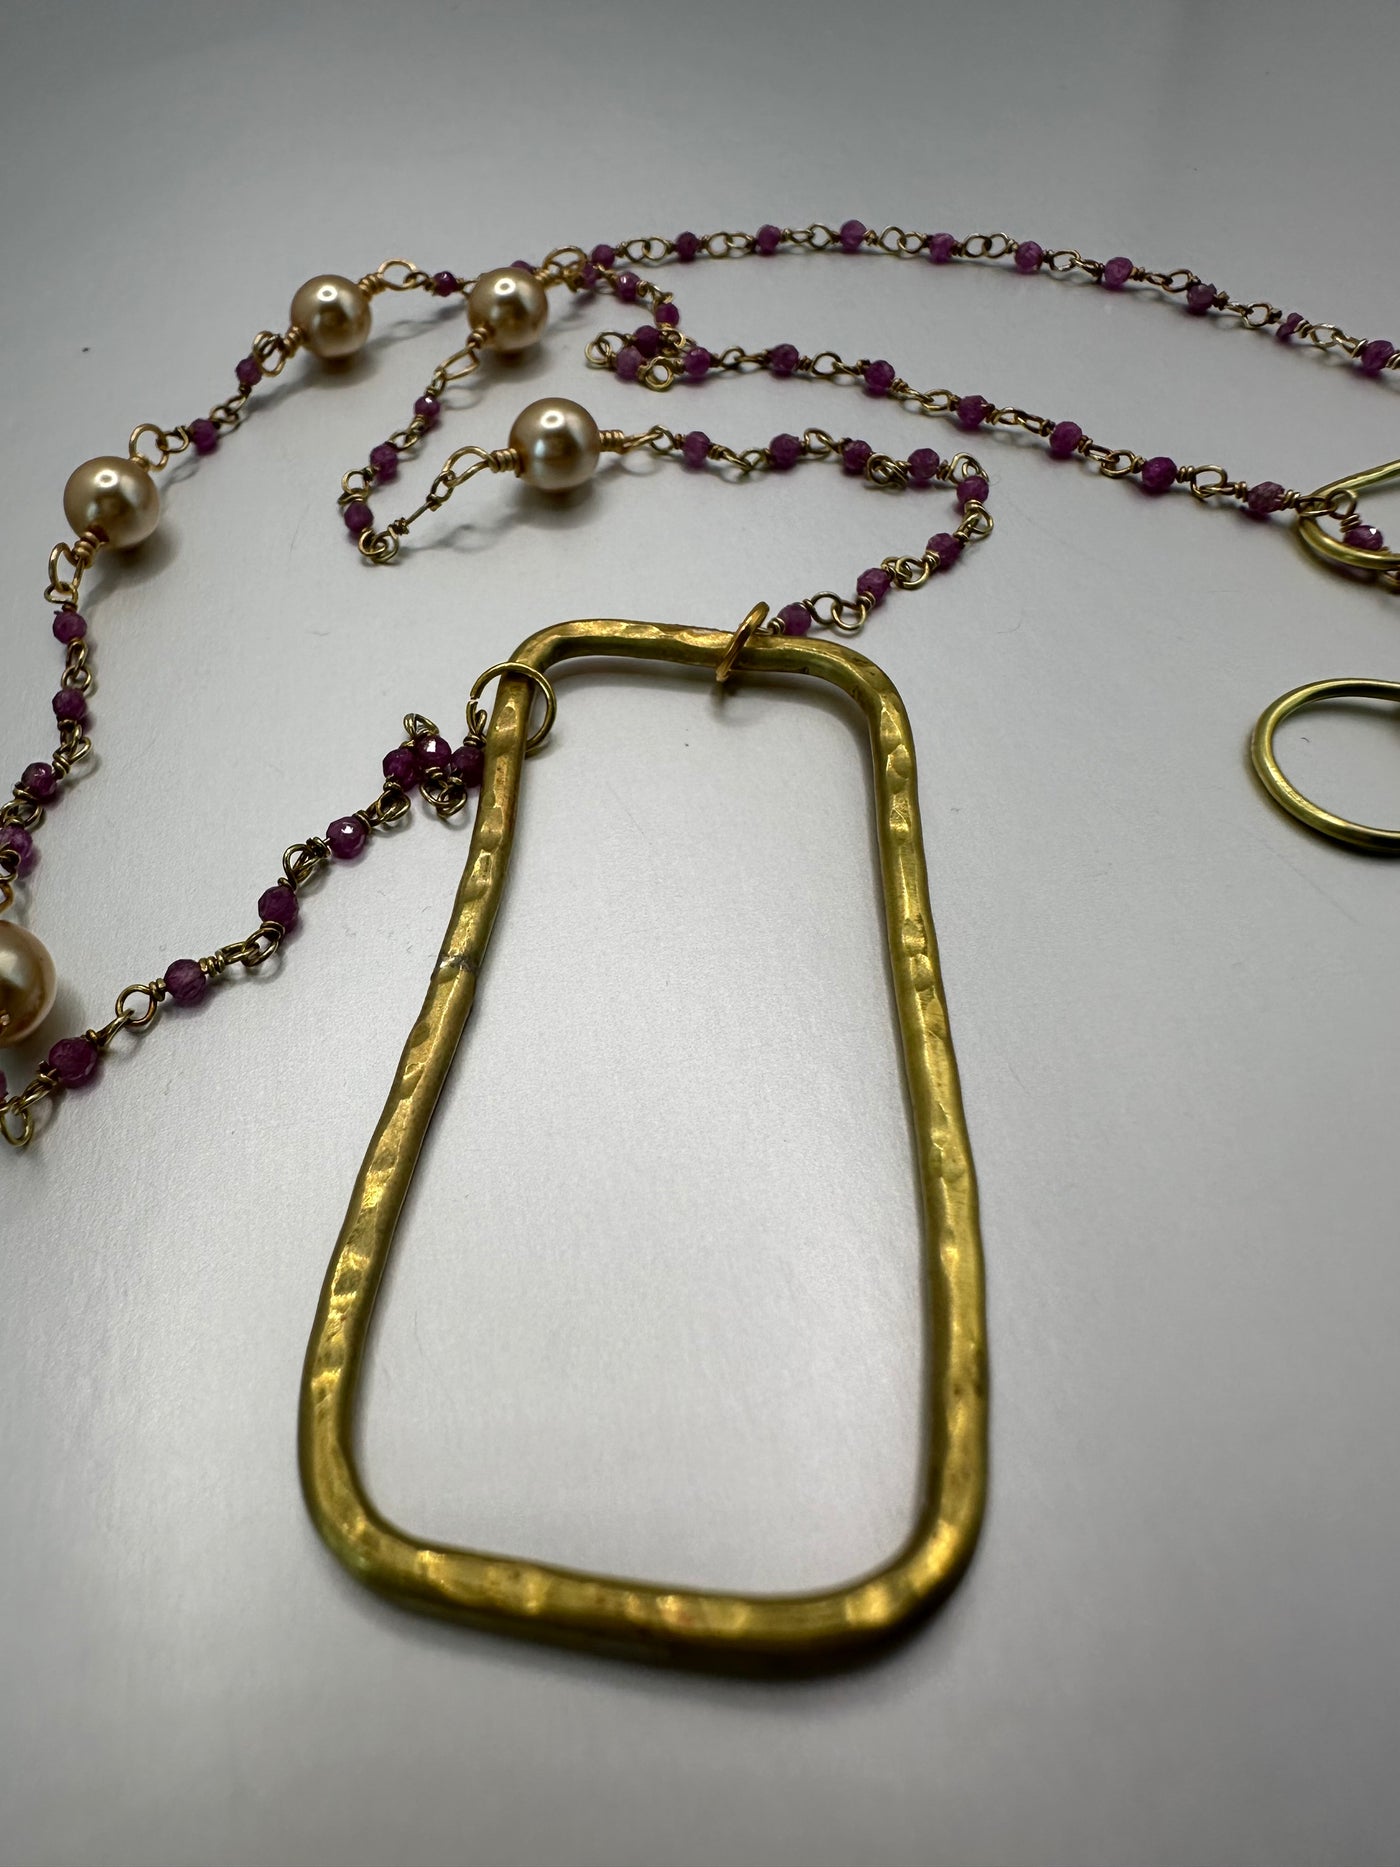 Silver and purple beads with brass rectangular pendant and golden pearls